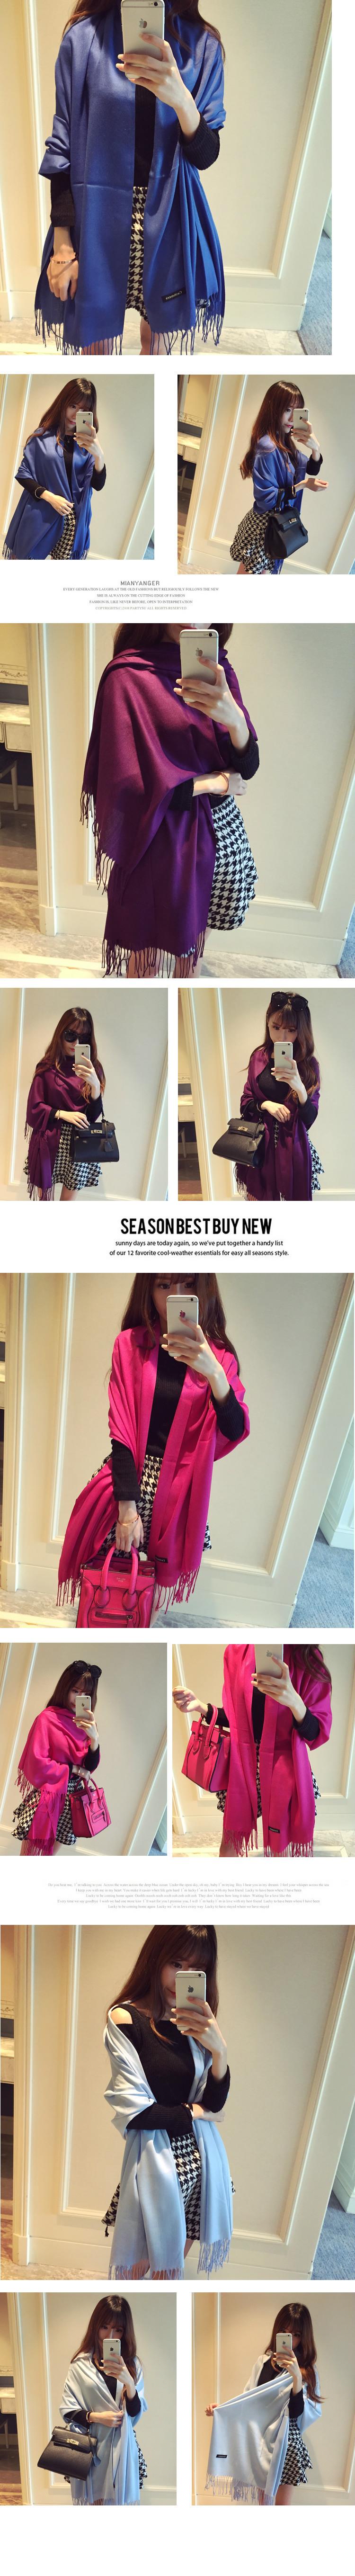 19065cm-hot-selling-2016-cashmere-women-scarf-national-wind-tassel-scarf-brand-shawls-and-scarves-wi-32732807415